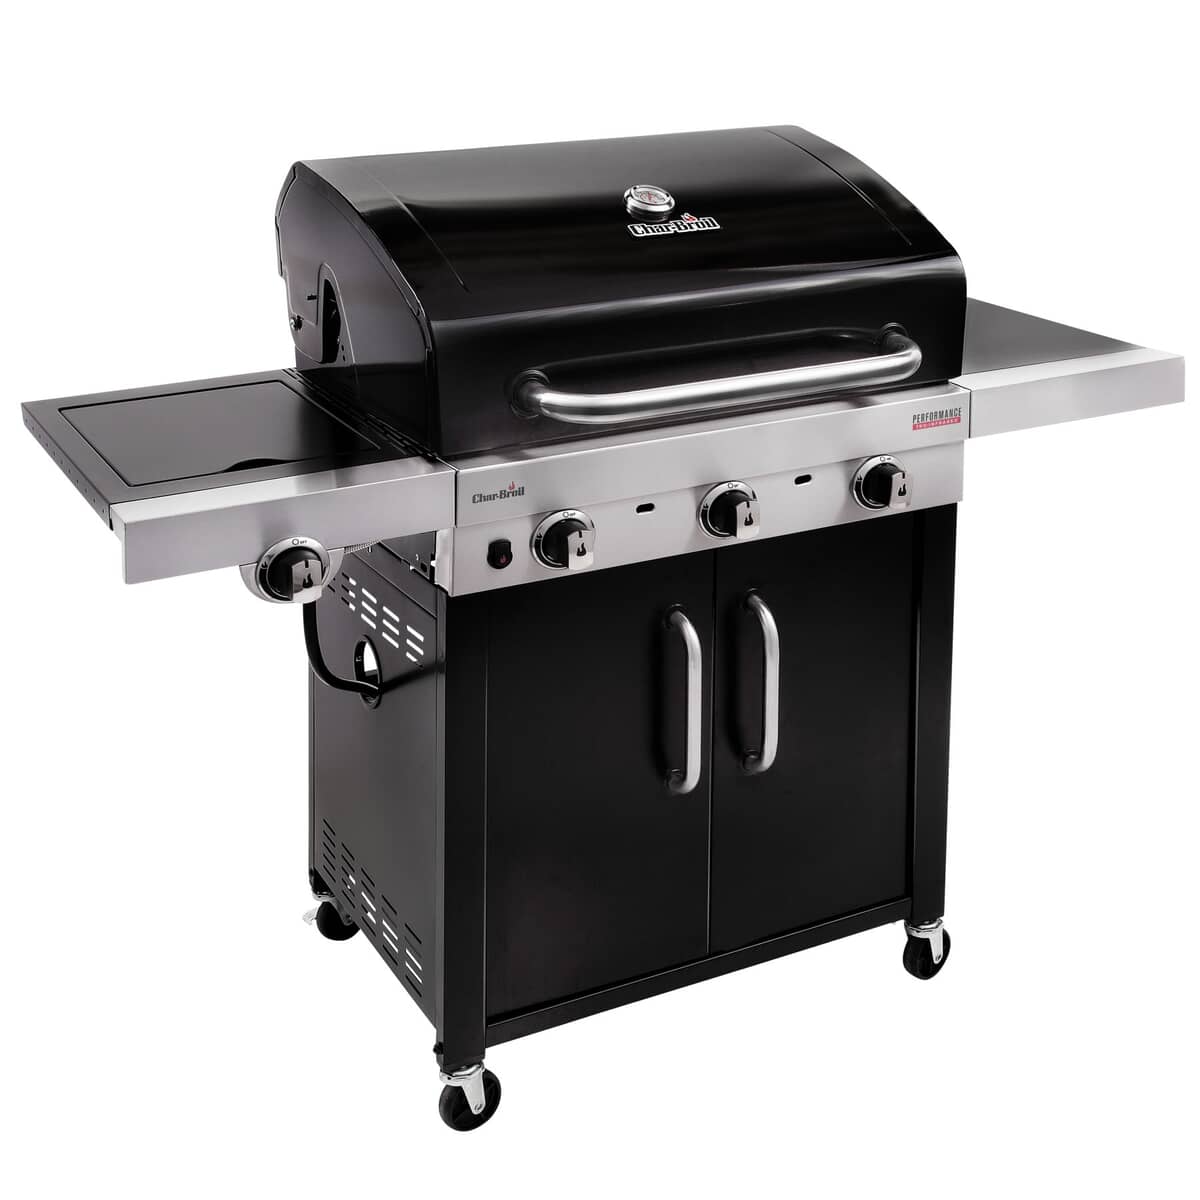 Stereotype Fjord Kong Lear Char Broil Performance 340 Black Gas BBQ (140743) - BBQ World